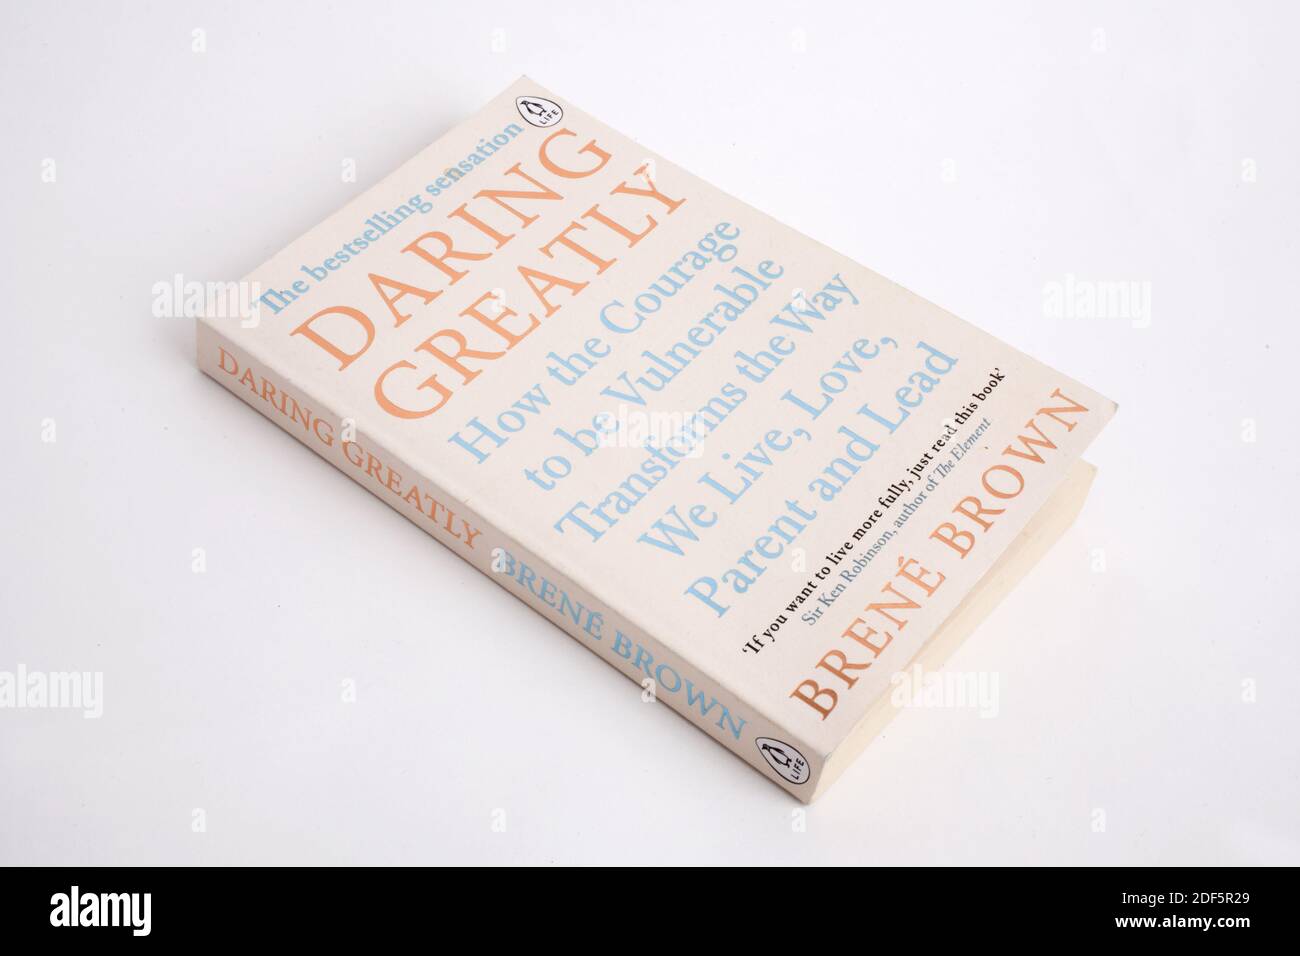 The book, Daring Greatly by Brene Brown , photographed against a studio background Stock Photo